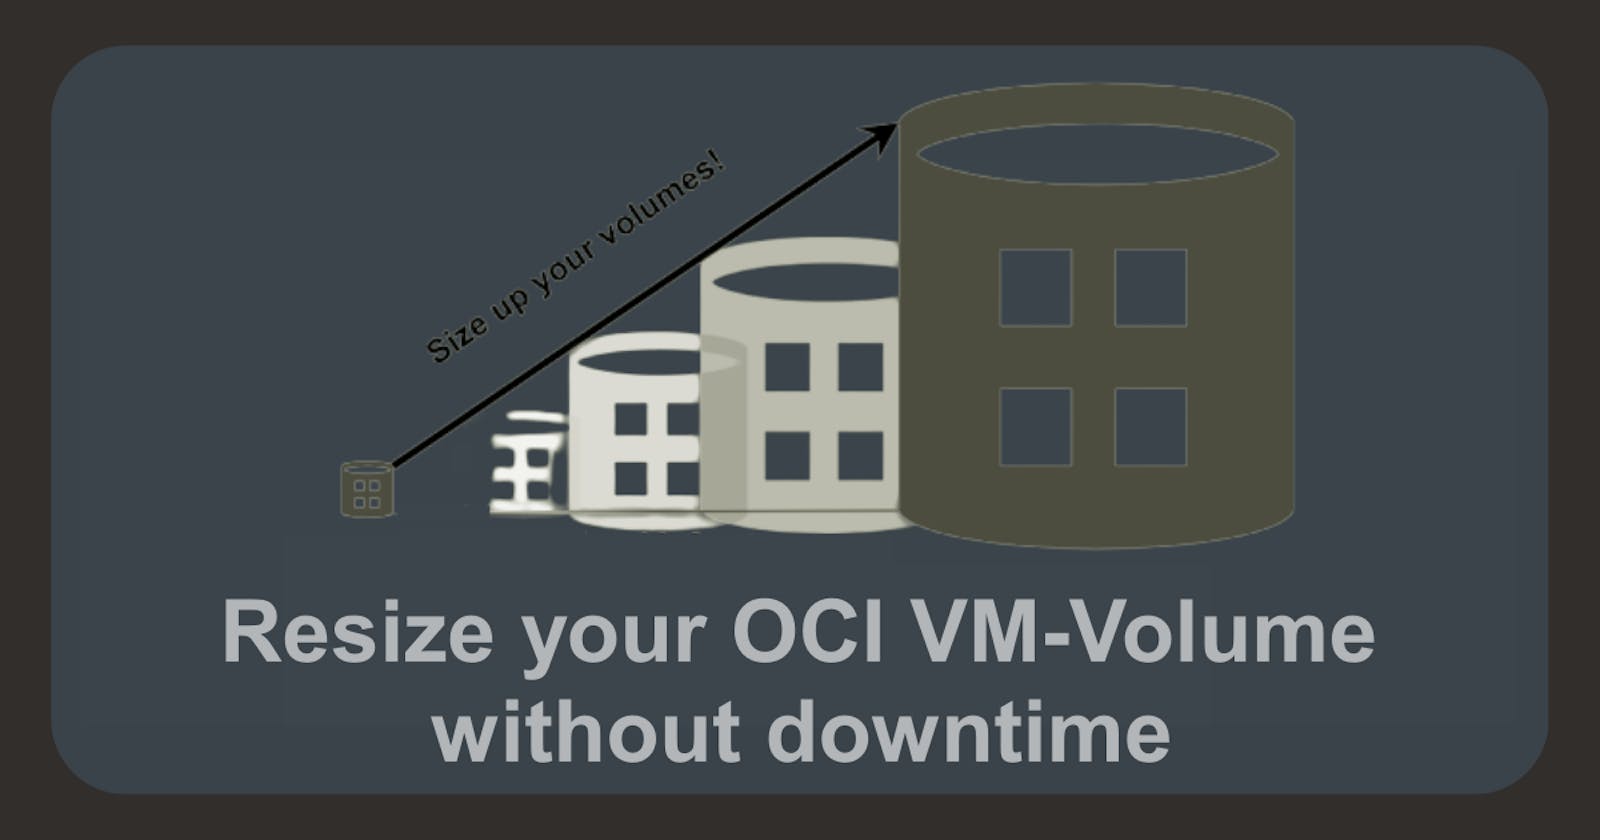 How to Resize your OCI VM-Volume without downtime